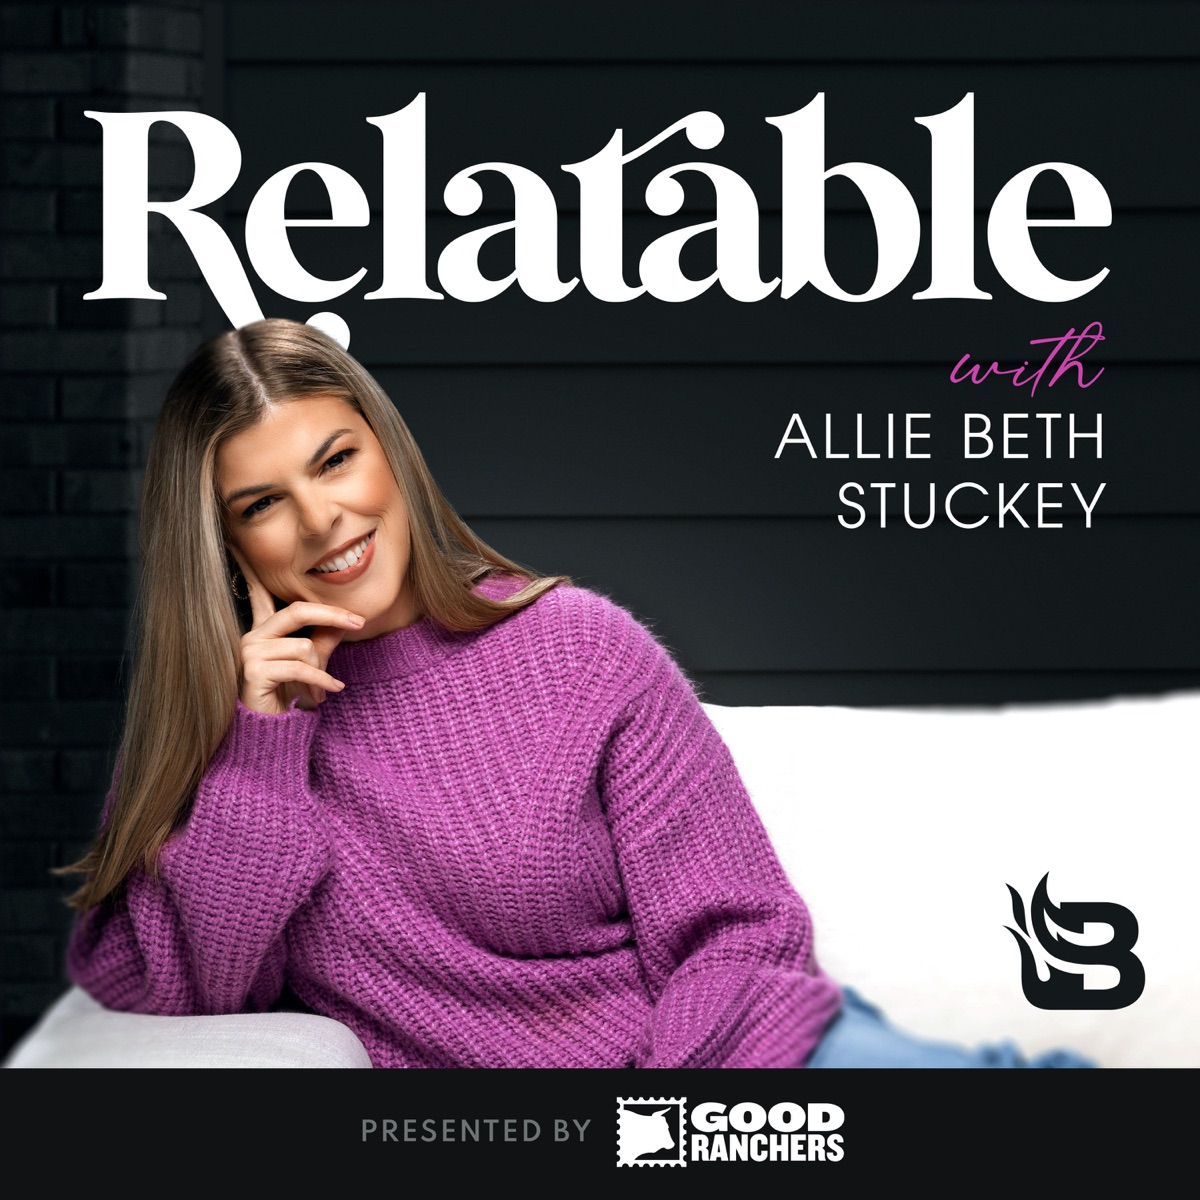 Antisex With Younger Boy - Relatable with Allie Beth Stuckey â€“ Podcast â€“ Podtail